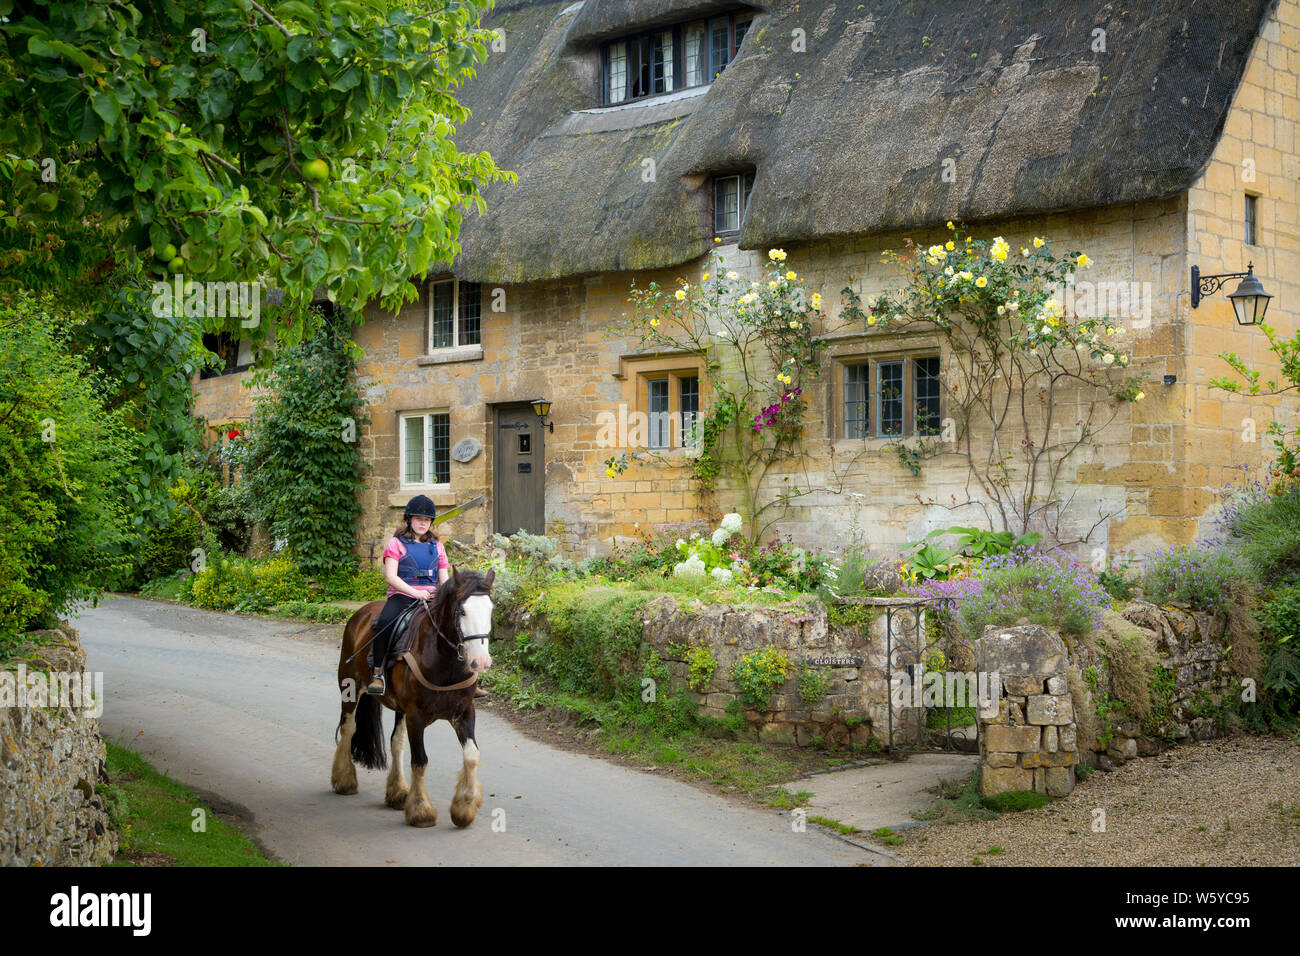 Girl on horseback below thatched roof cottage, Stanton, the Cotswolds, Gloucestershire, England Stock Photo